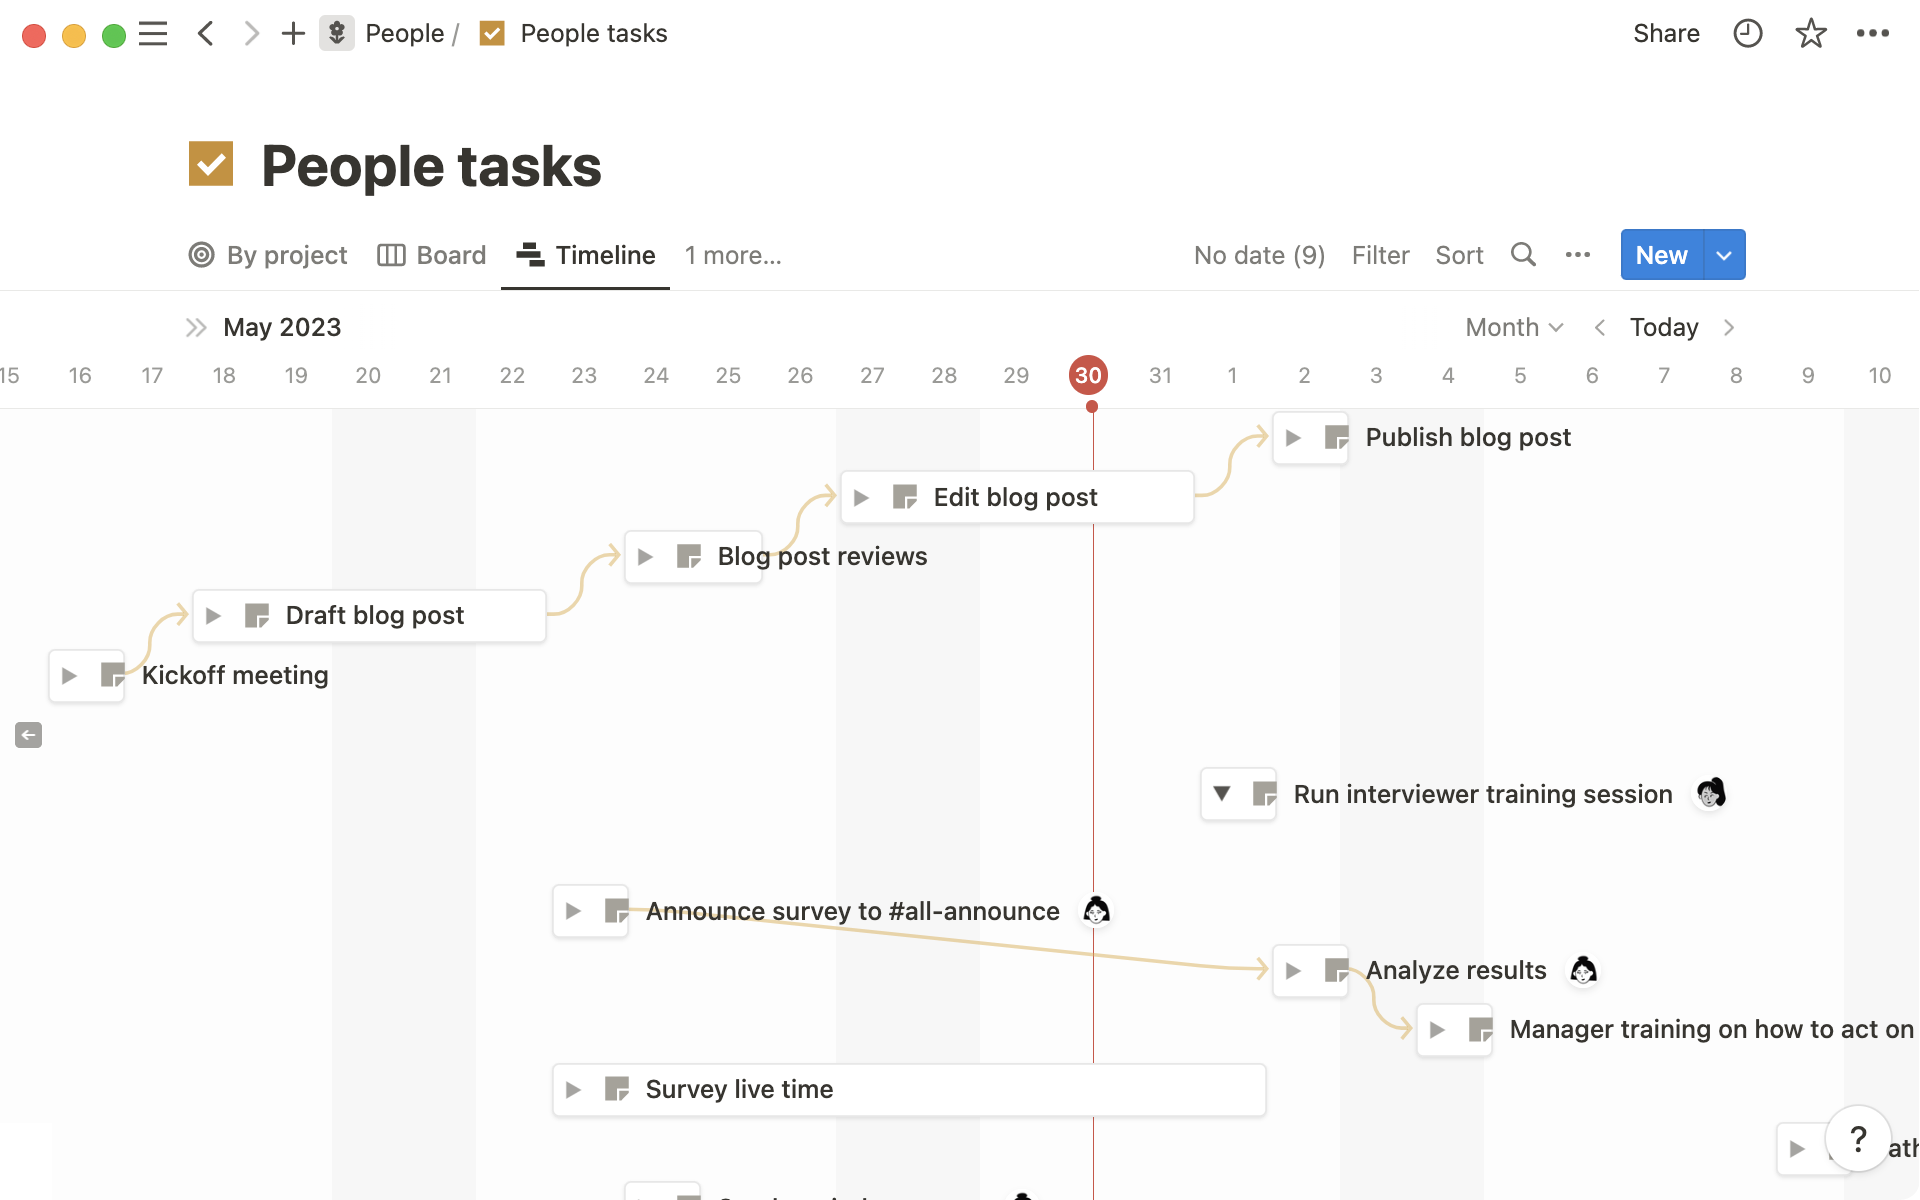 Visualize which tasks are blocking others in timeline view.